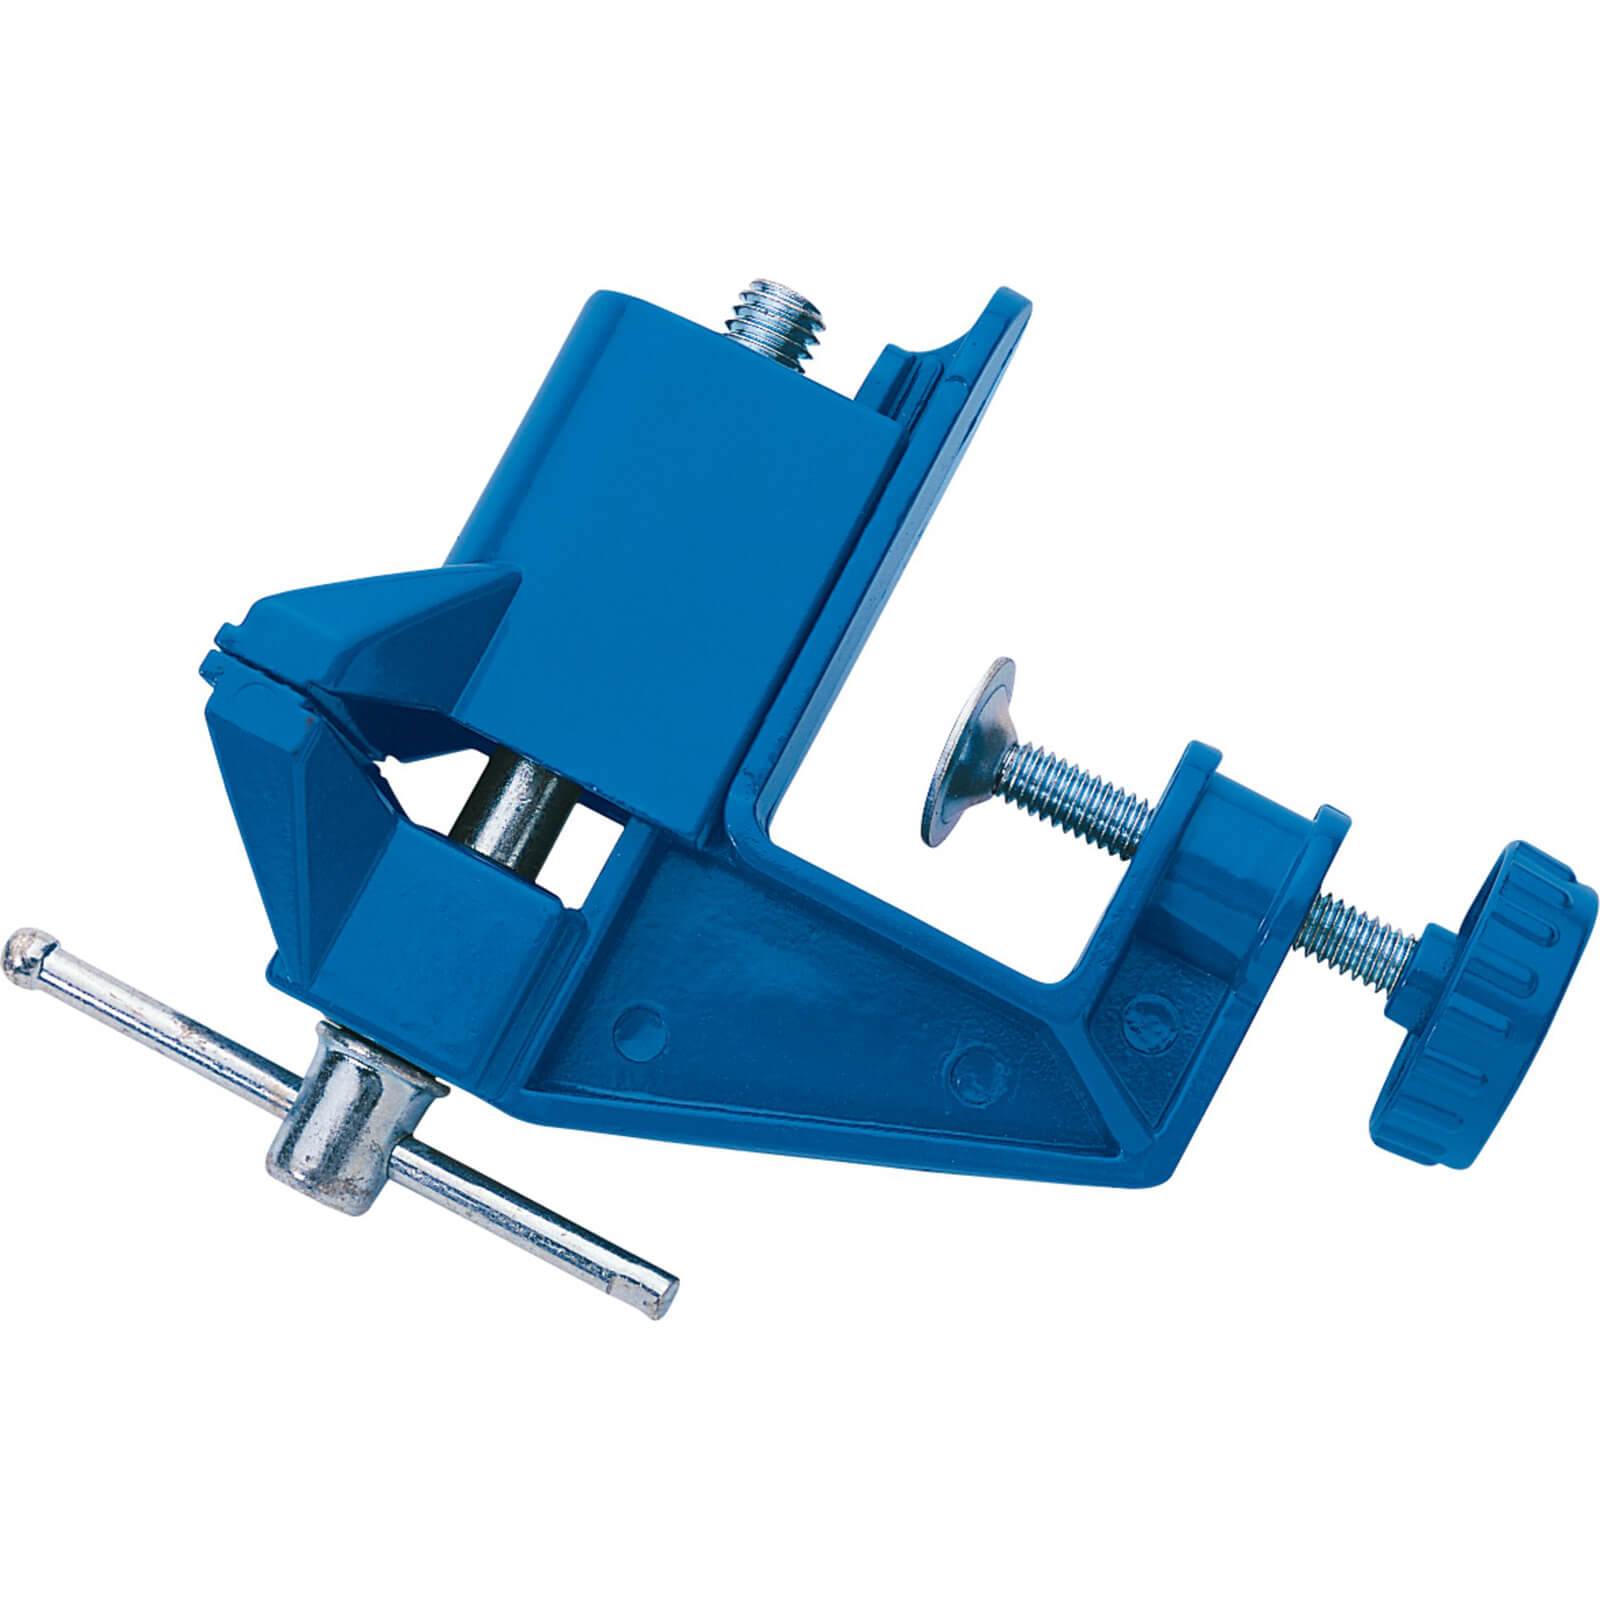 Image of Draper VC50H Clamp On Hobby Bench Vice 50mm